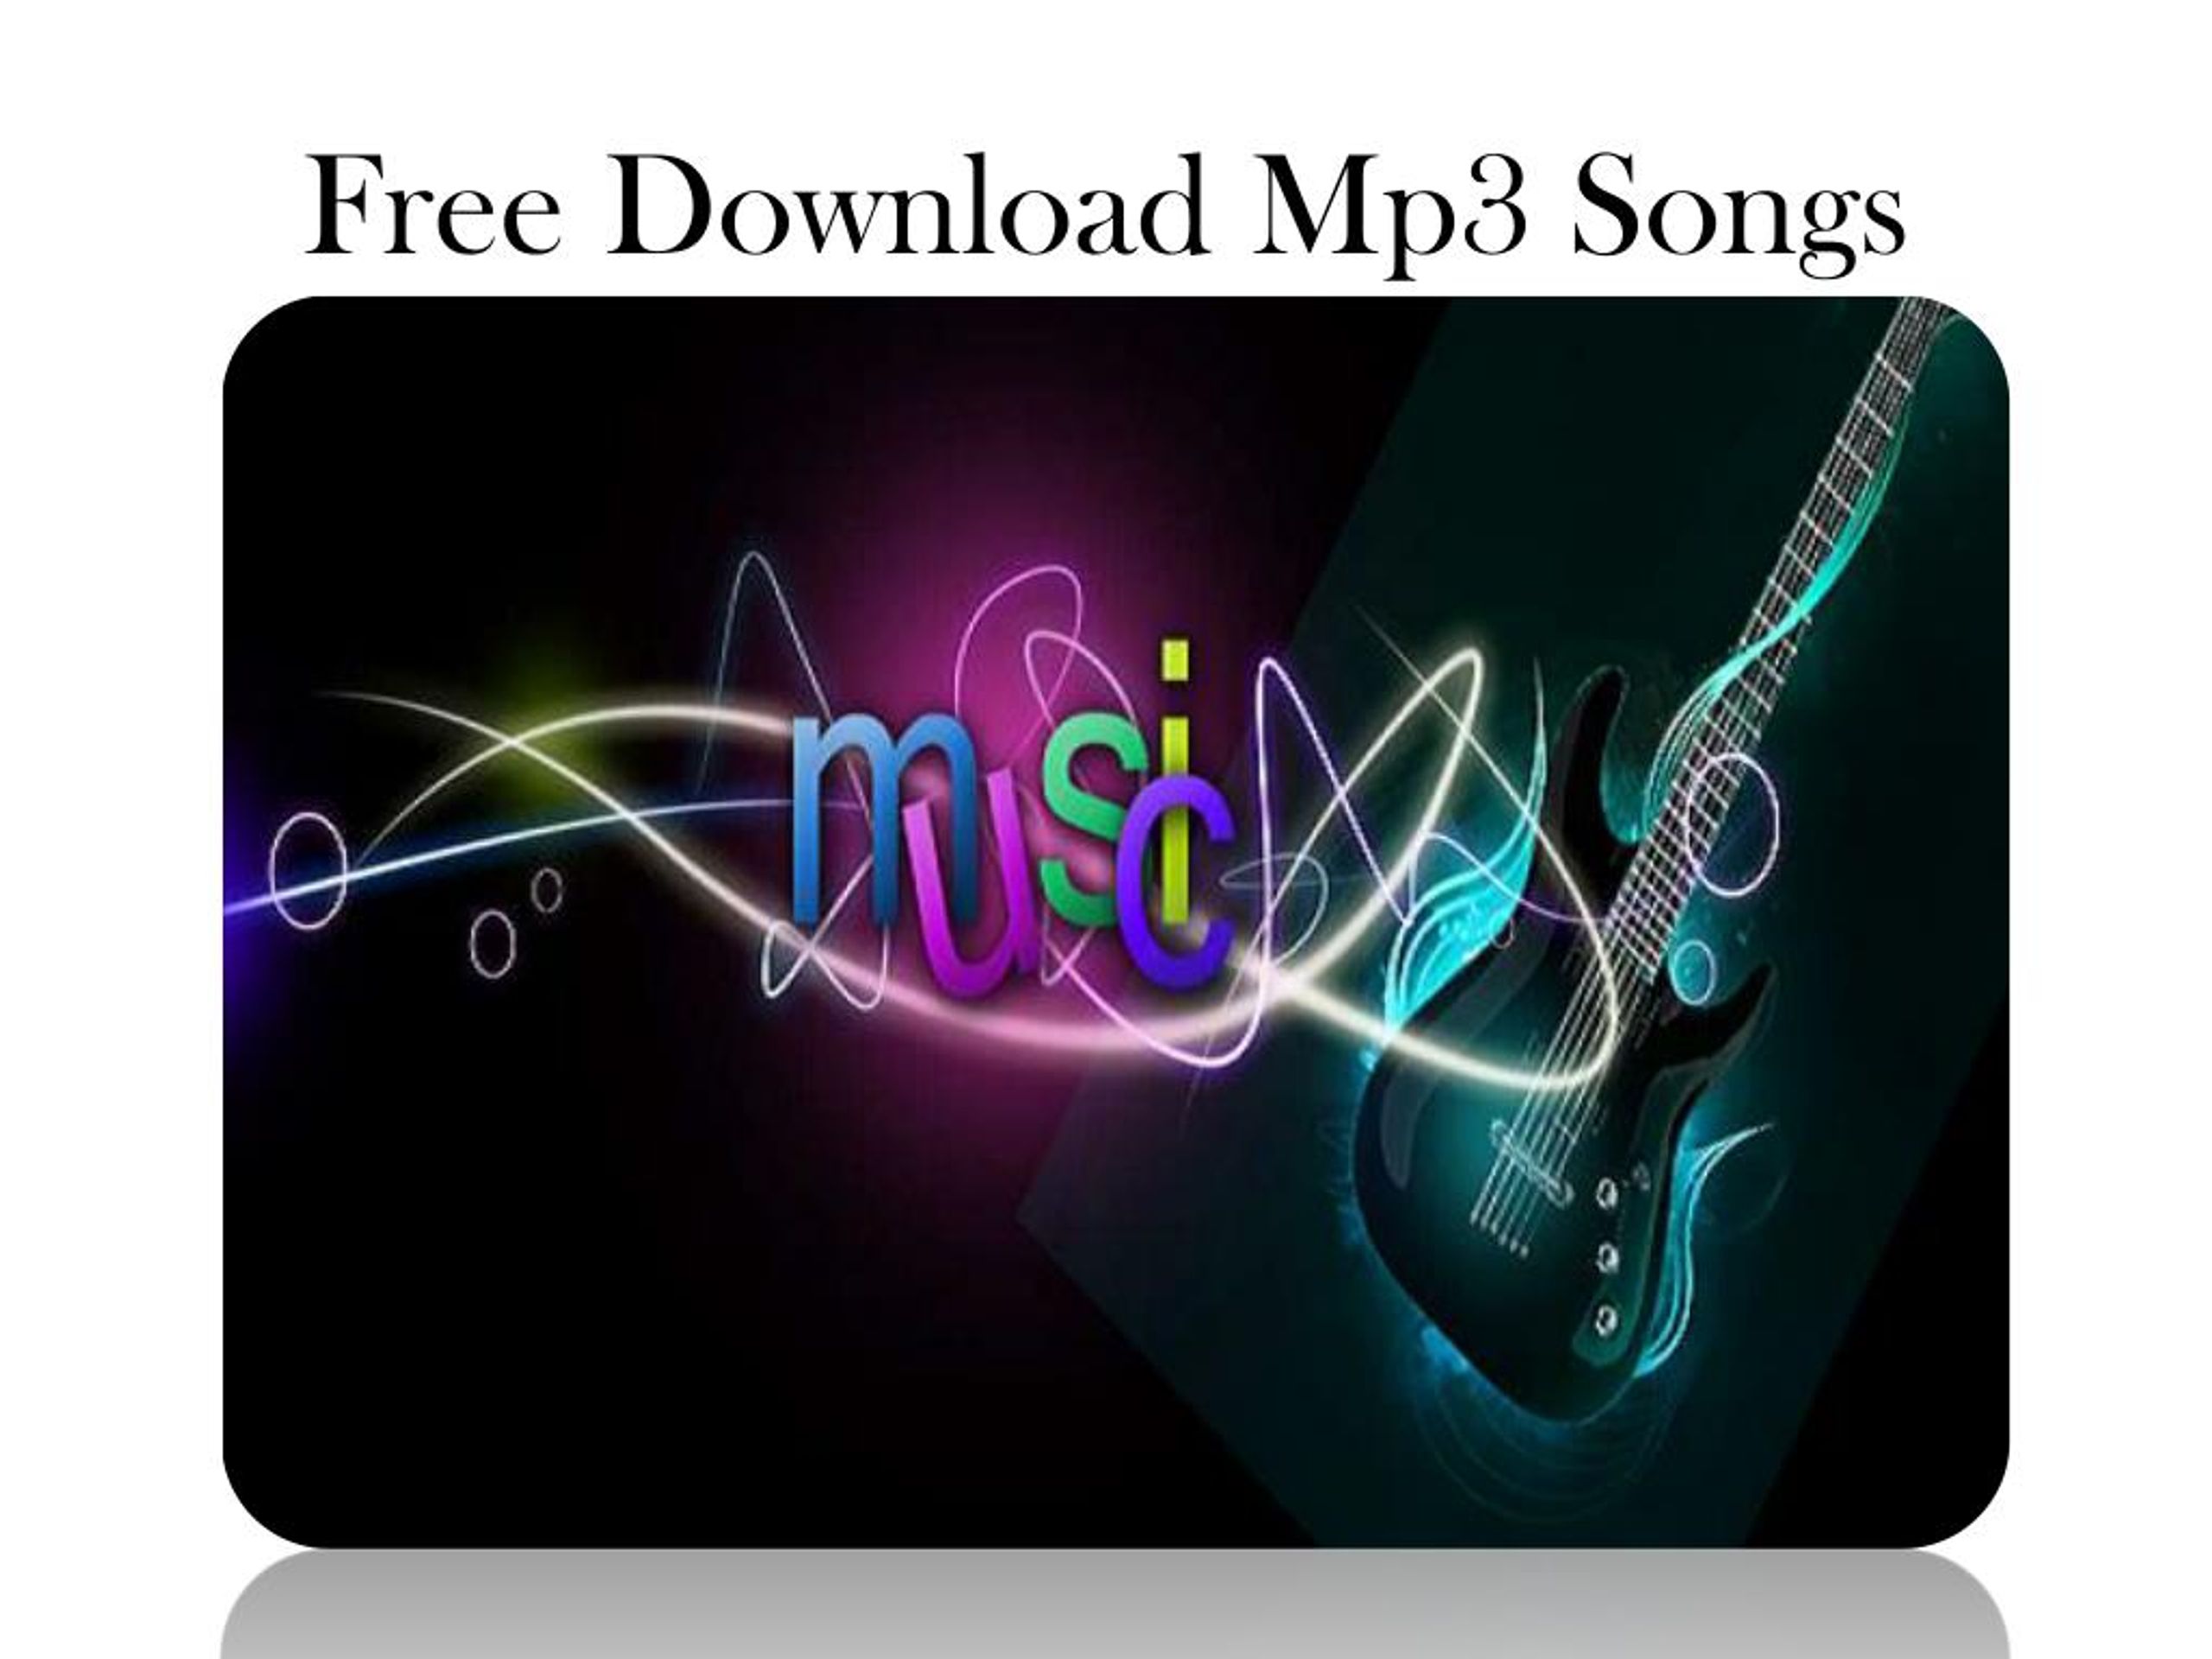 PPT - Mp3 Songs Free Download PowerPoint Presentation, free download ...